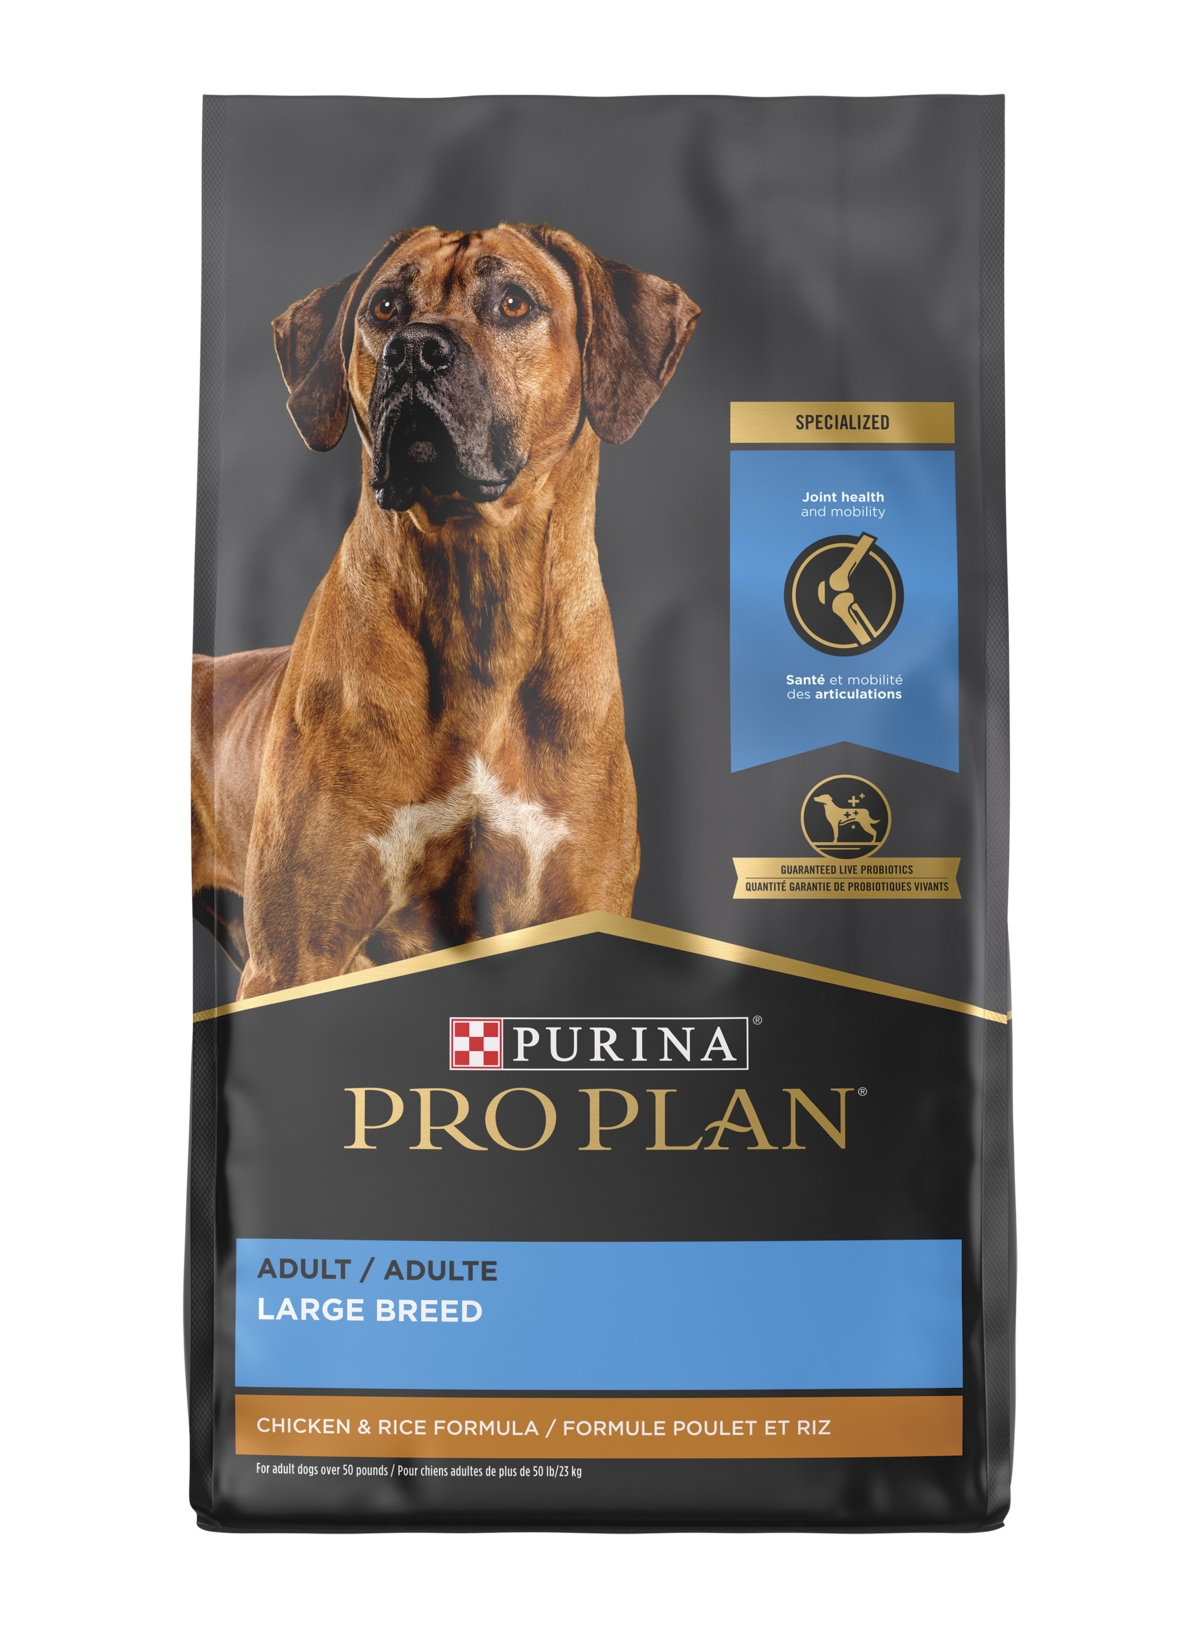 Purina Pro Plan Adult Large Breed Chicken & Rice Formula, 34 lbs